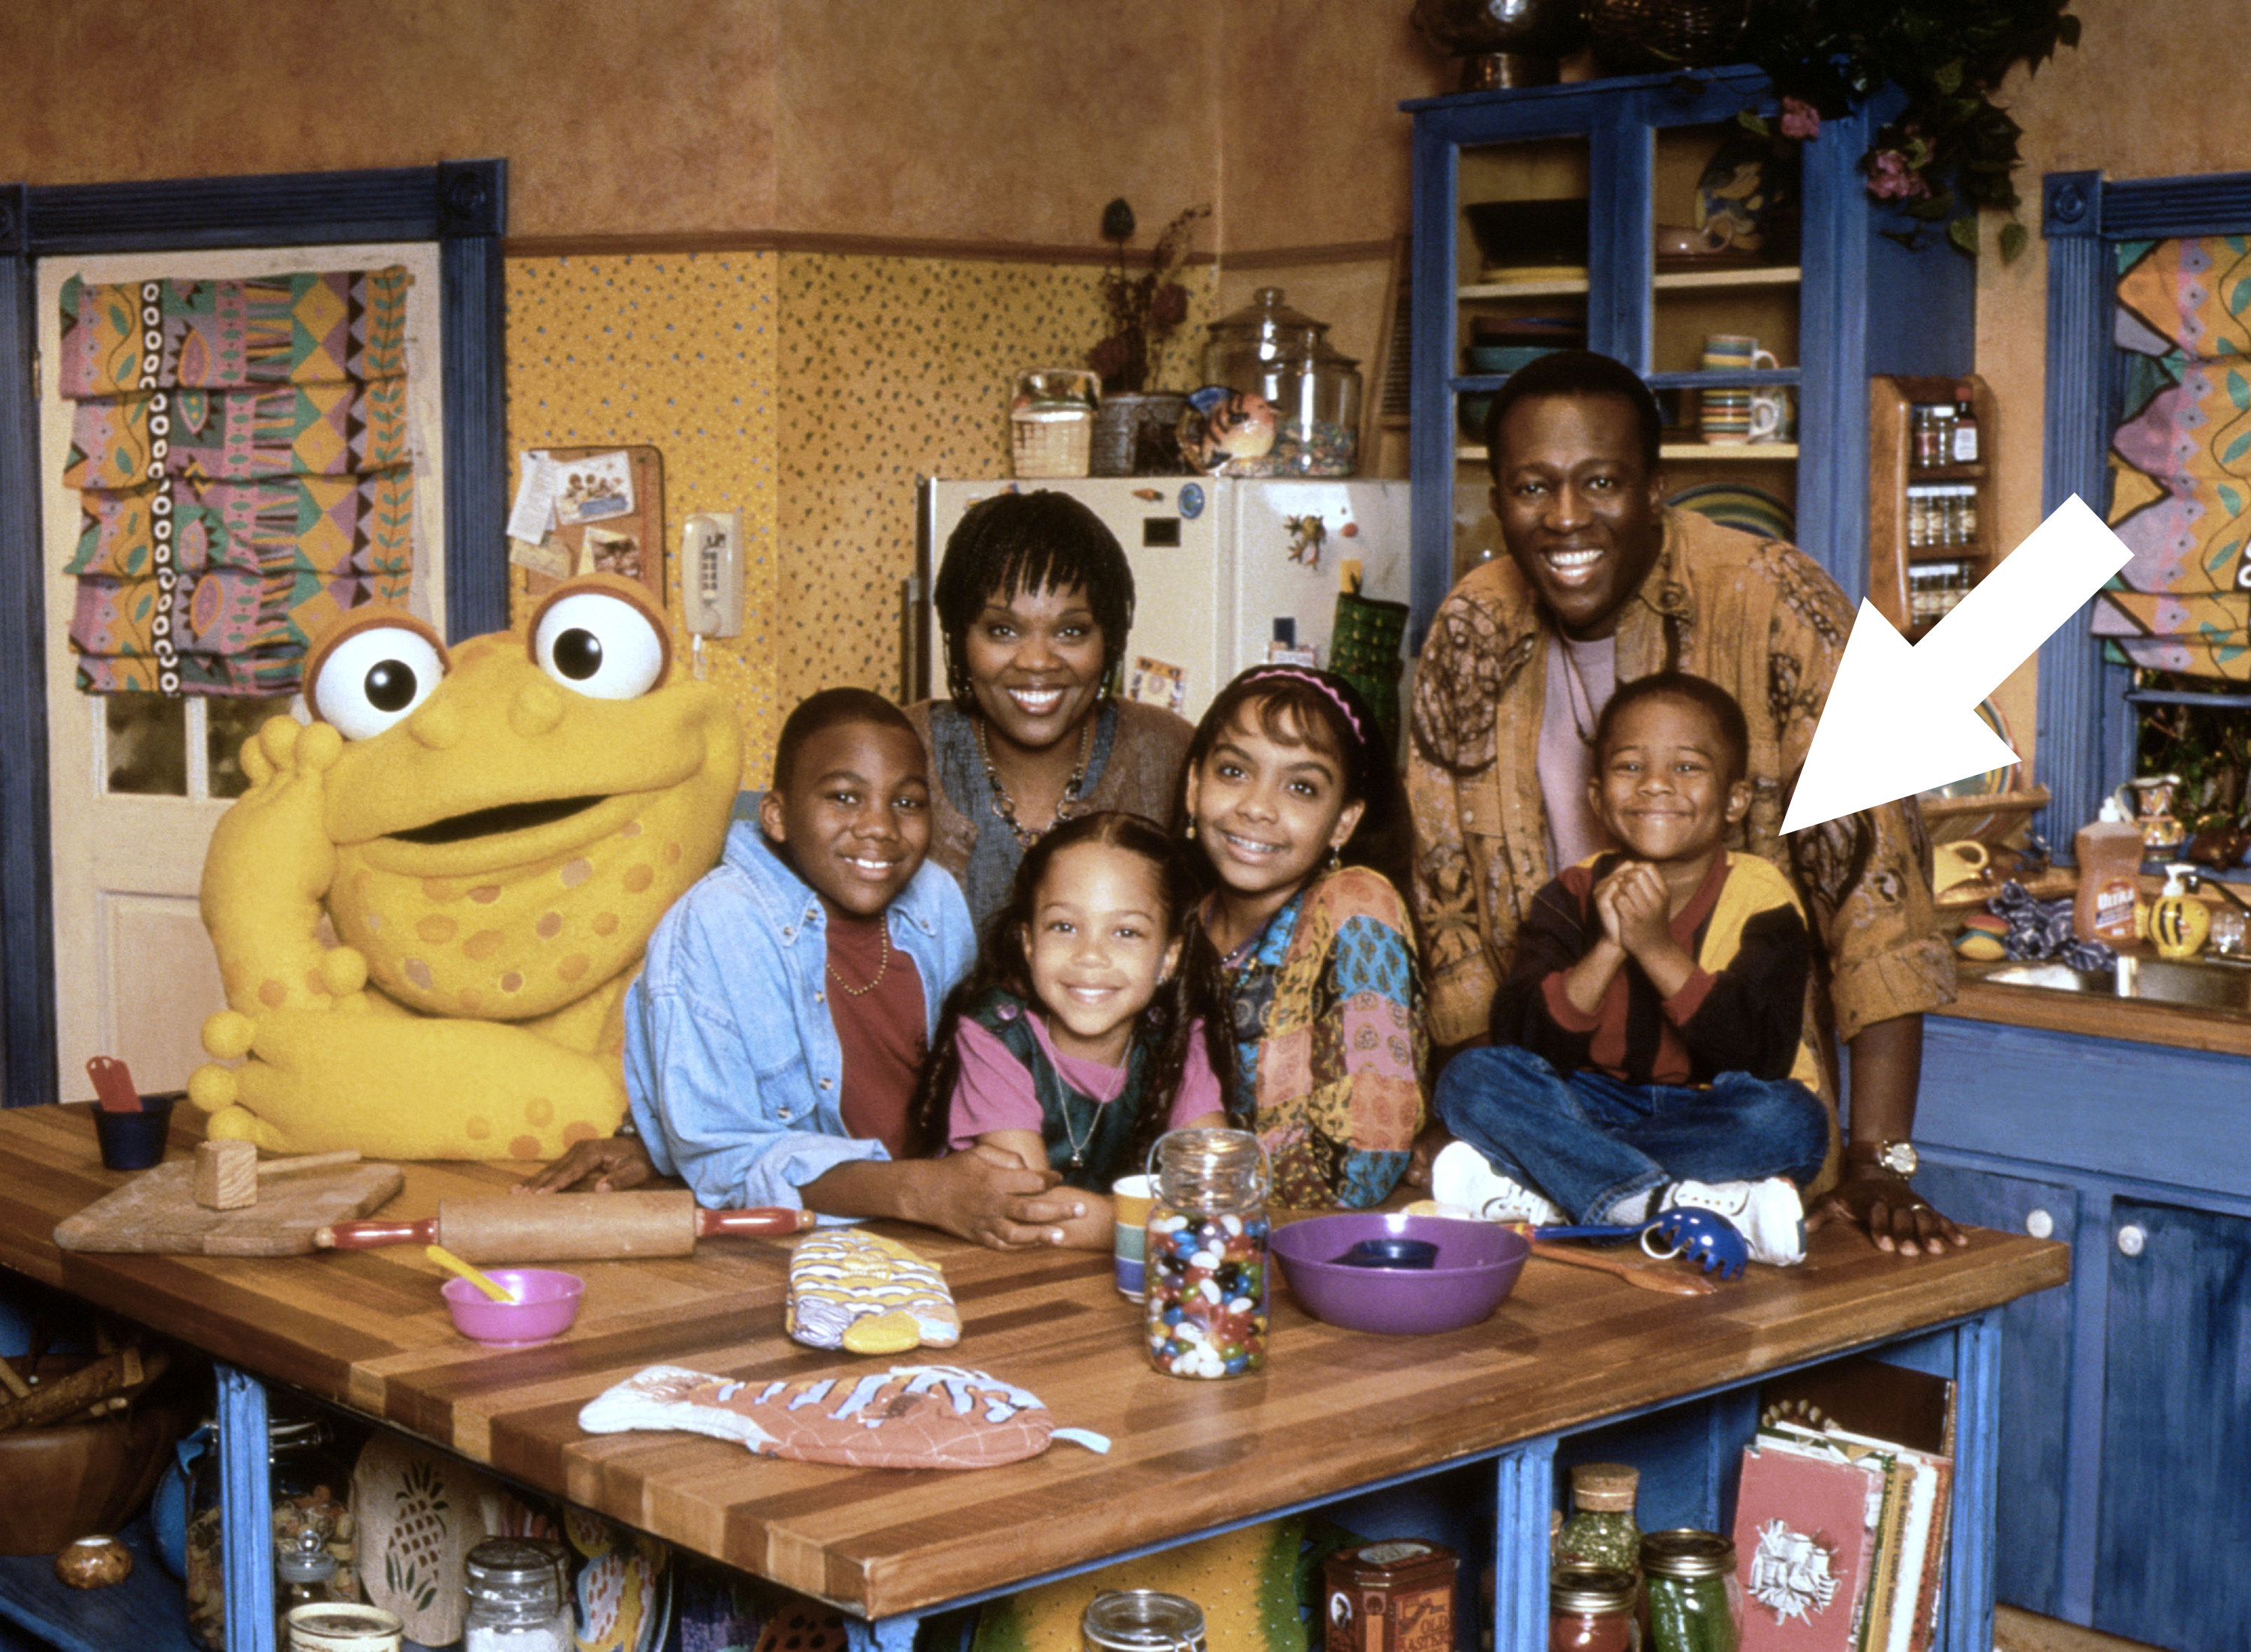 The main cast of Gullah Gullah Island, with an arrow pointing to Simeon, who is also looks very young